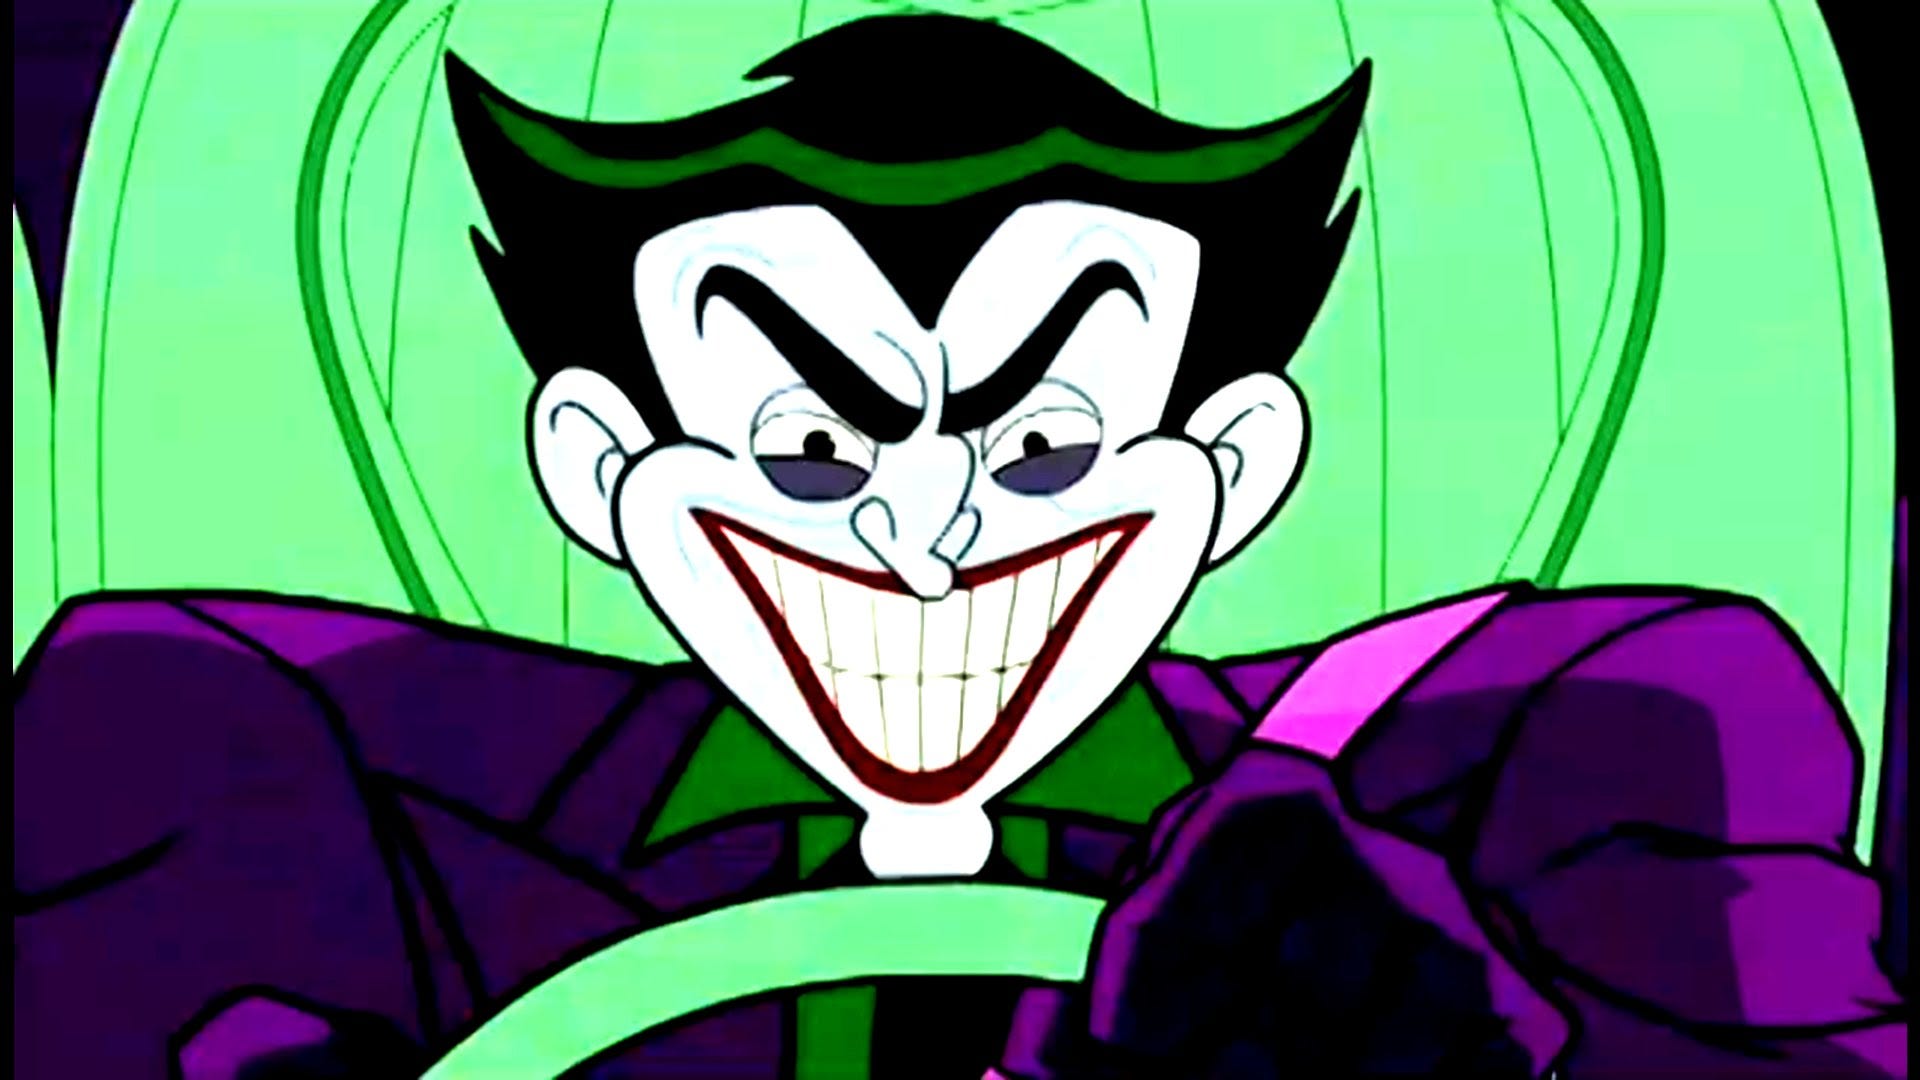 [Source](https://www.denofgeek.com/tv/the-many-different-looks-of-the-joker-on-screen/)